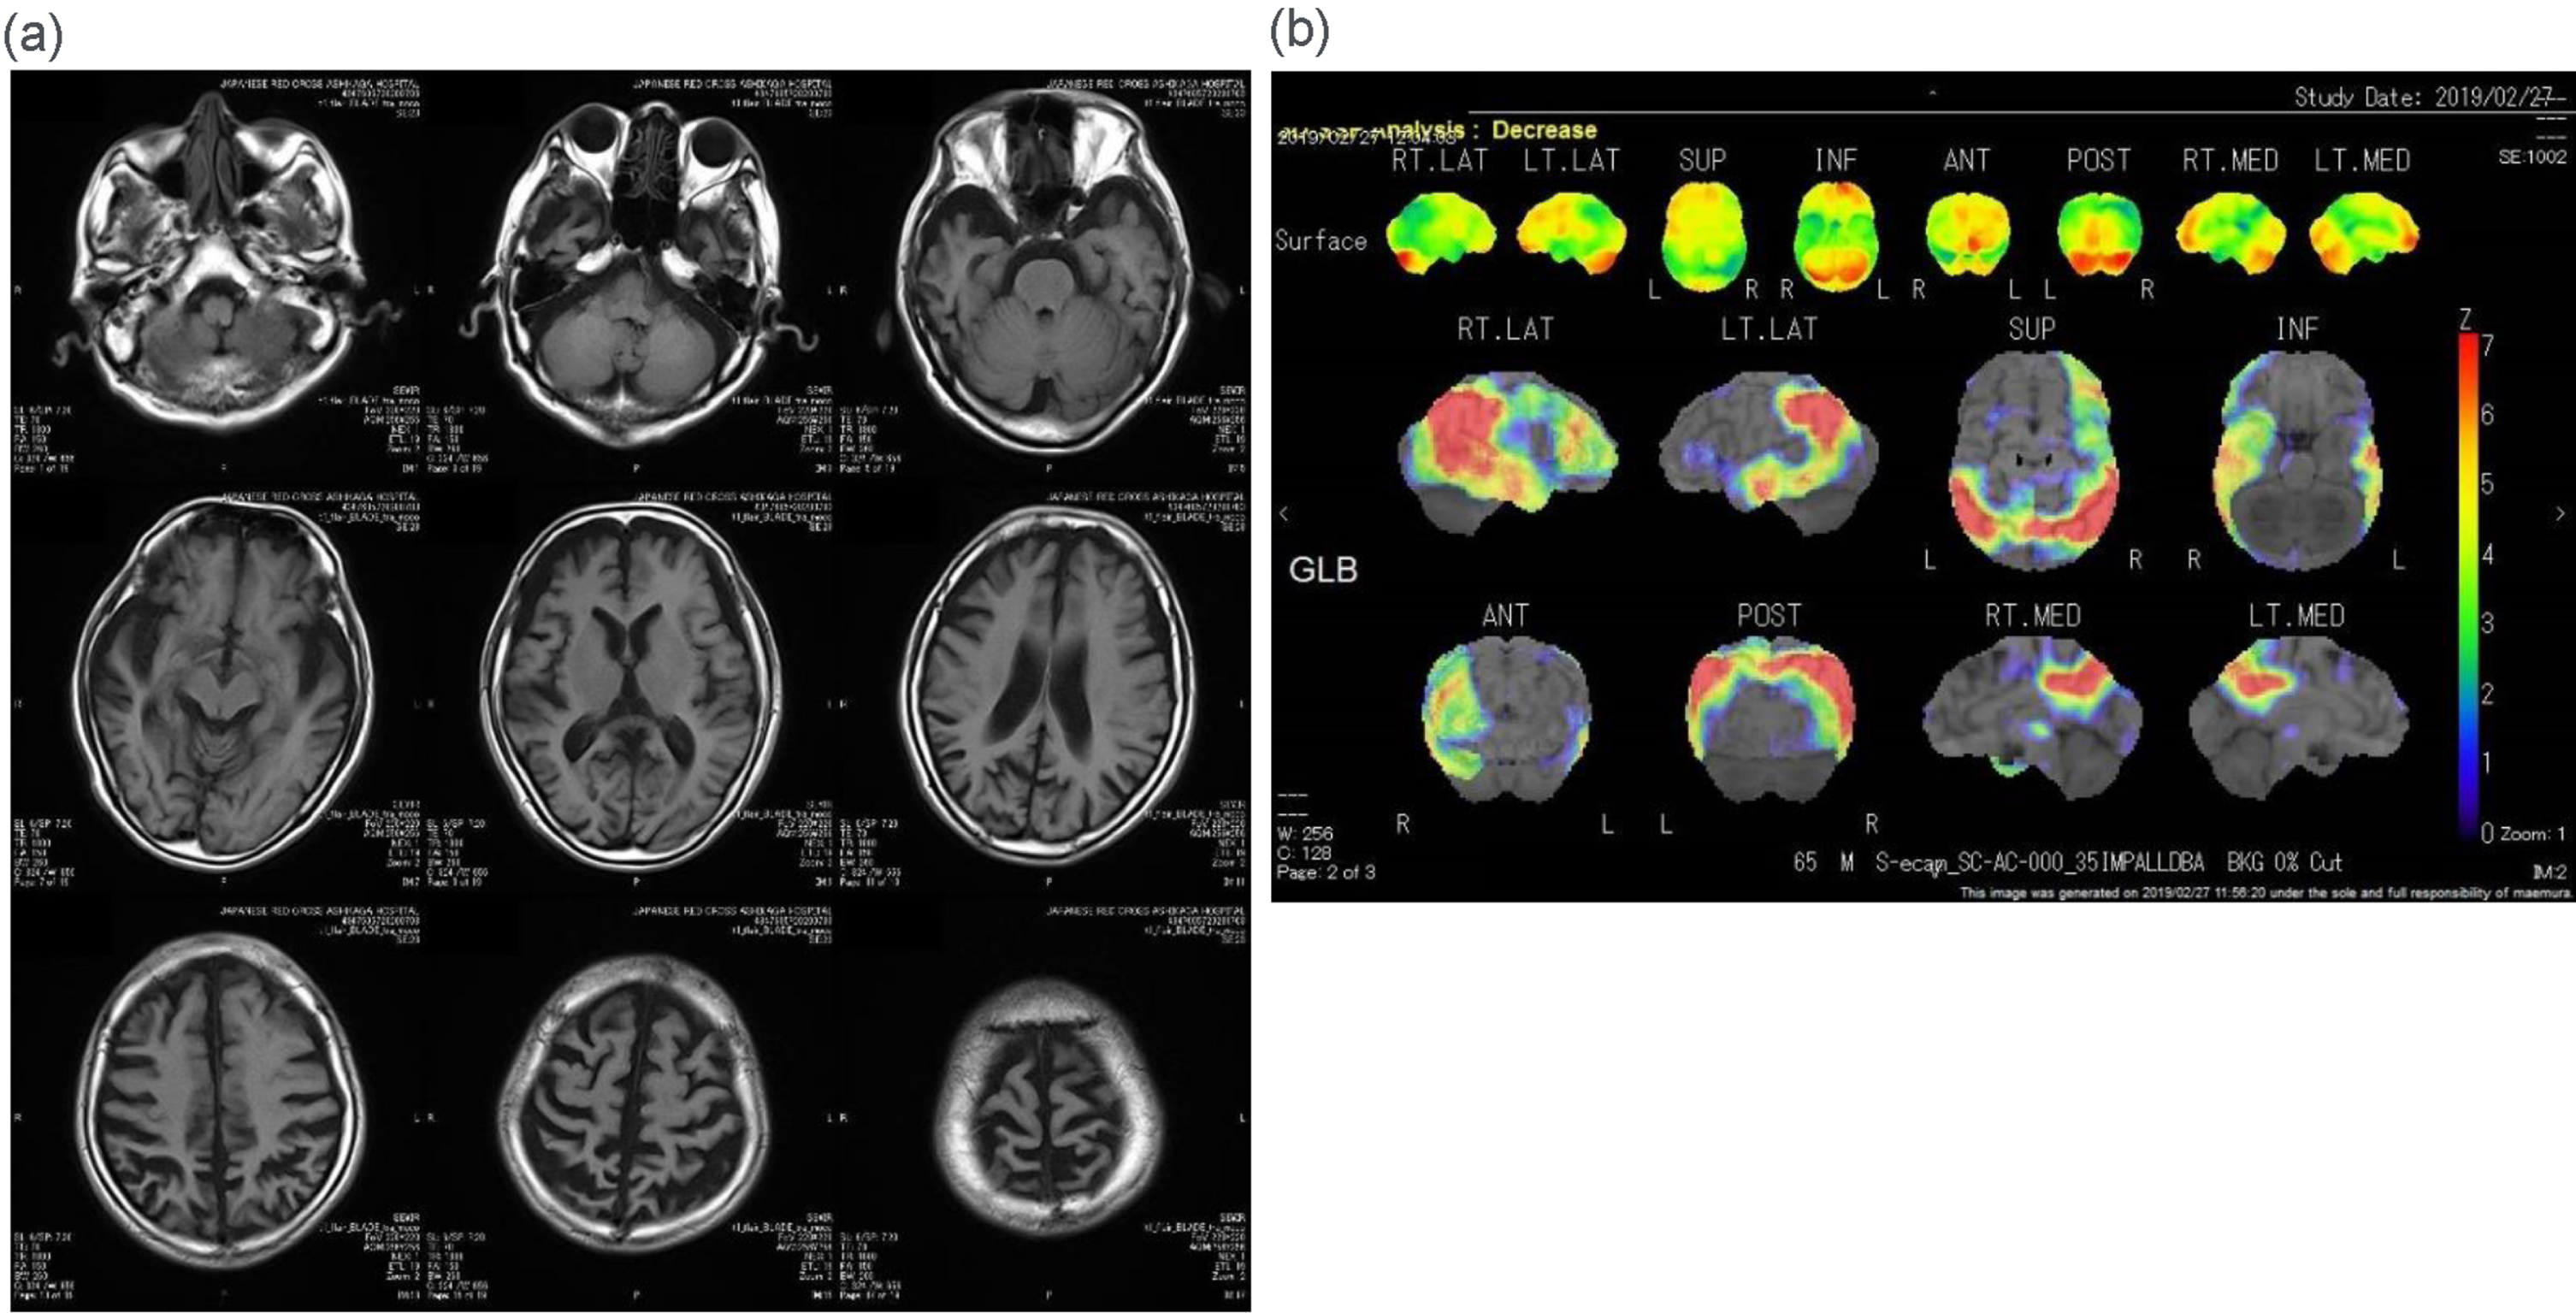 Follow-up brain images. (a) Fluid-attenuated inversion recovery (FLAIR) magnetic resonance imaging of the head of the patient at 66 years of age shows progressive atrophy of the right lateral temporal and parietal lobes as well as the left parietal lobe. (b) 123I-labeled N-isopropyl-p-iodo-amphetamine (123I-IMP) single-photon emission computed tomography (SPECT) imaging of the head of the same individual at 65 years of age and subsequent three-dimensional stereotactic surface projections (3D-SSP) analysis show that the relative hypoperfusion of both parietal lobes has progressed.